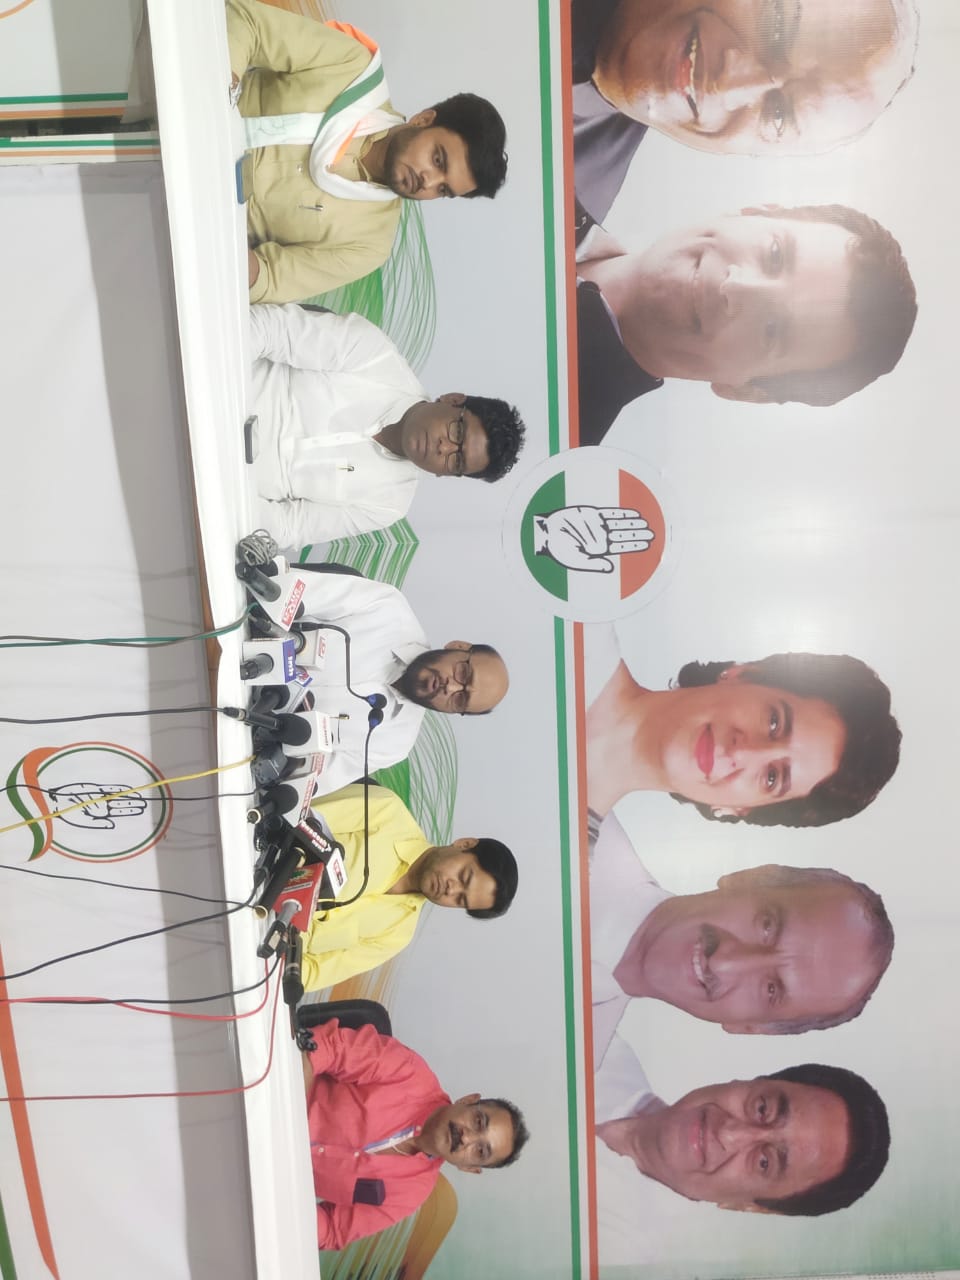 bhopal, Congress encircles, forest minister